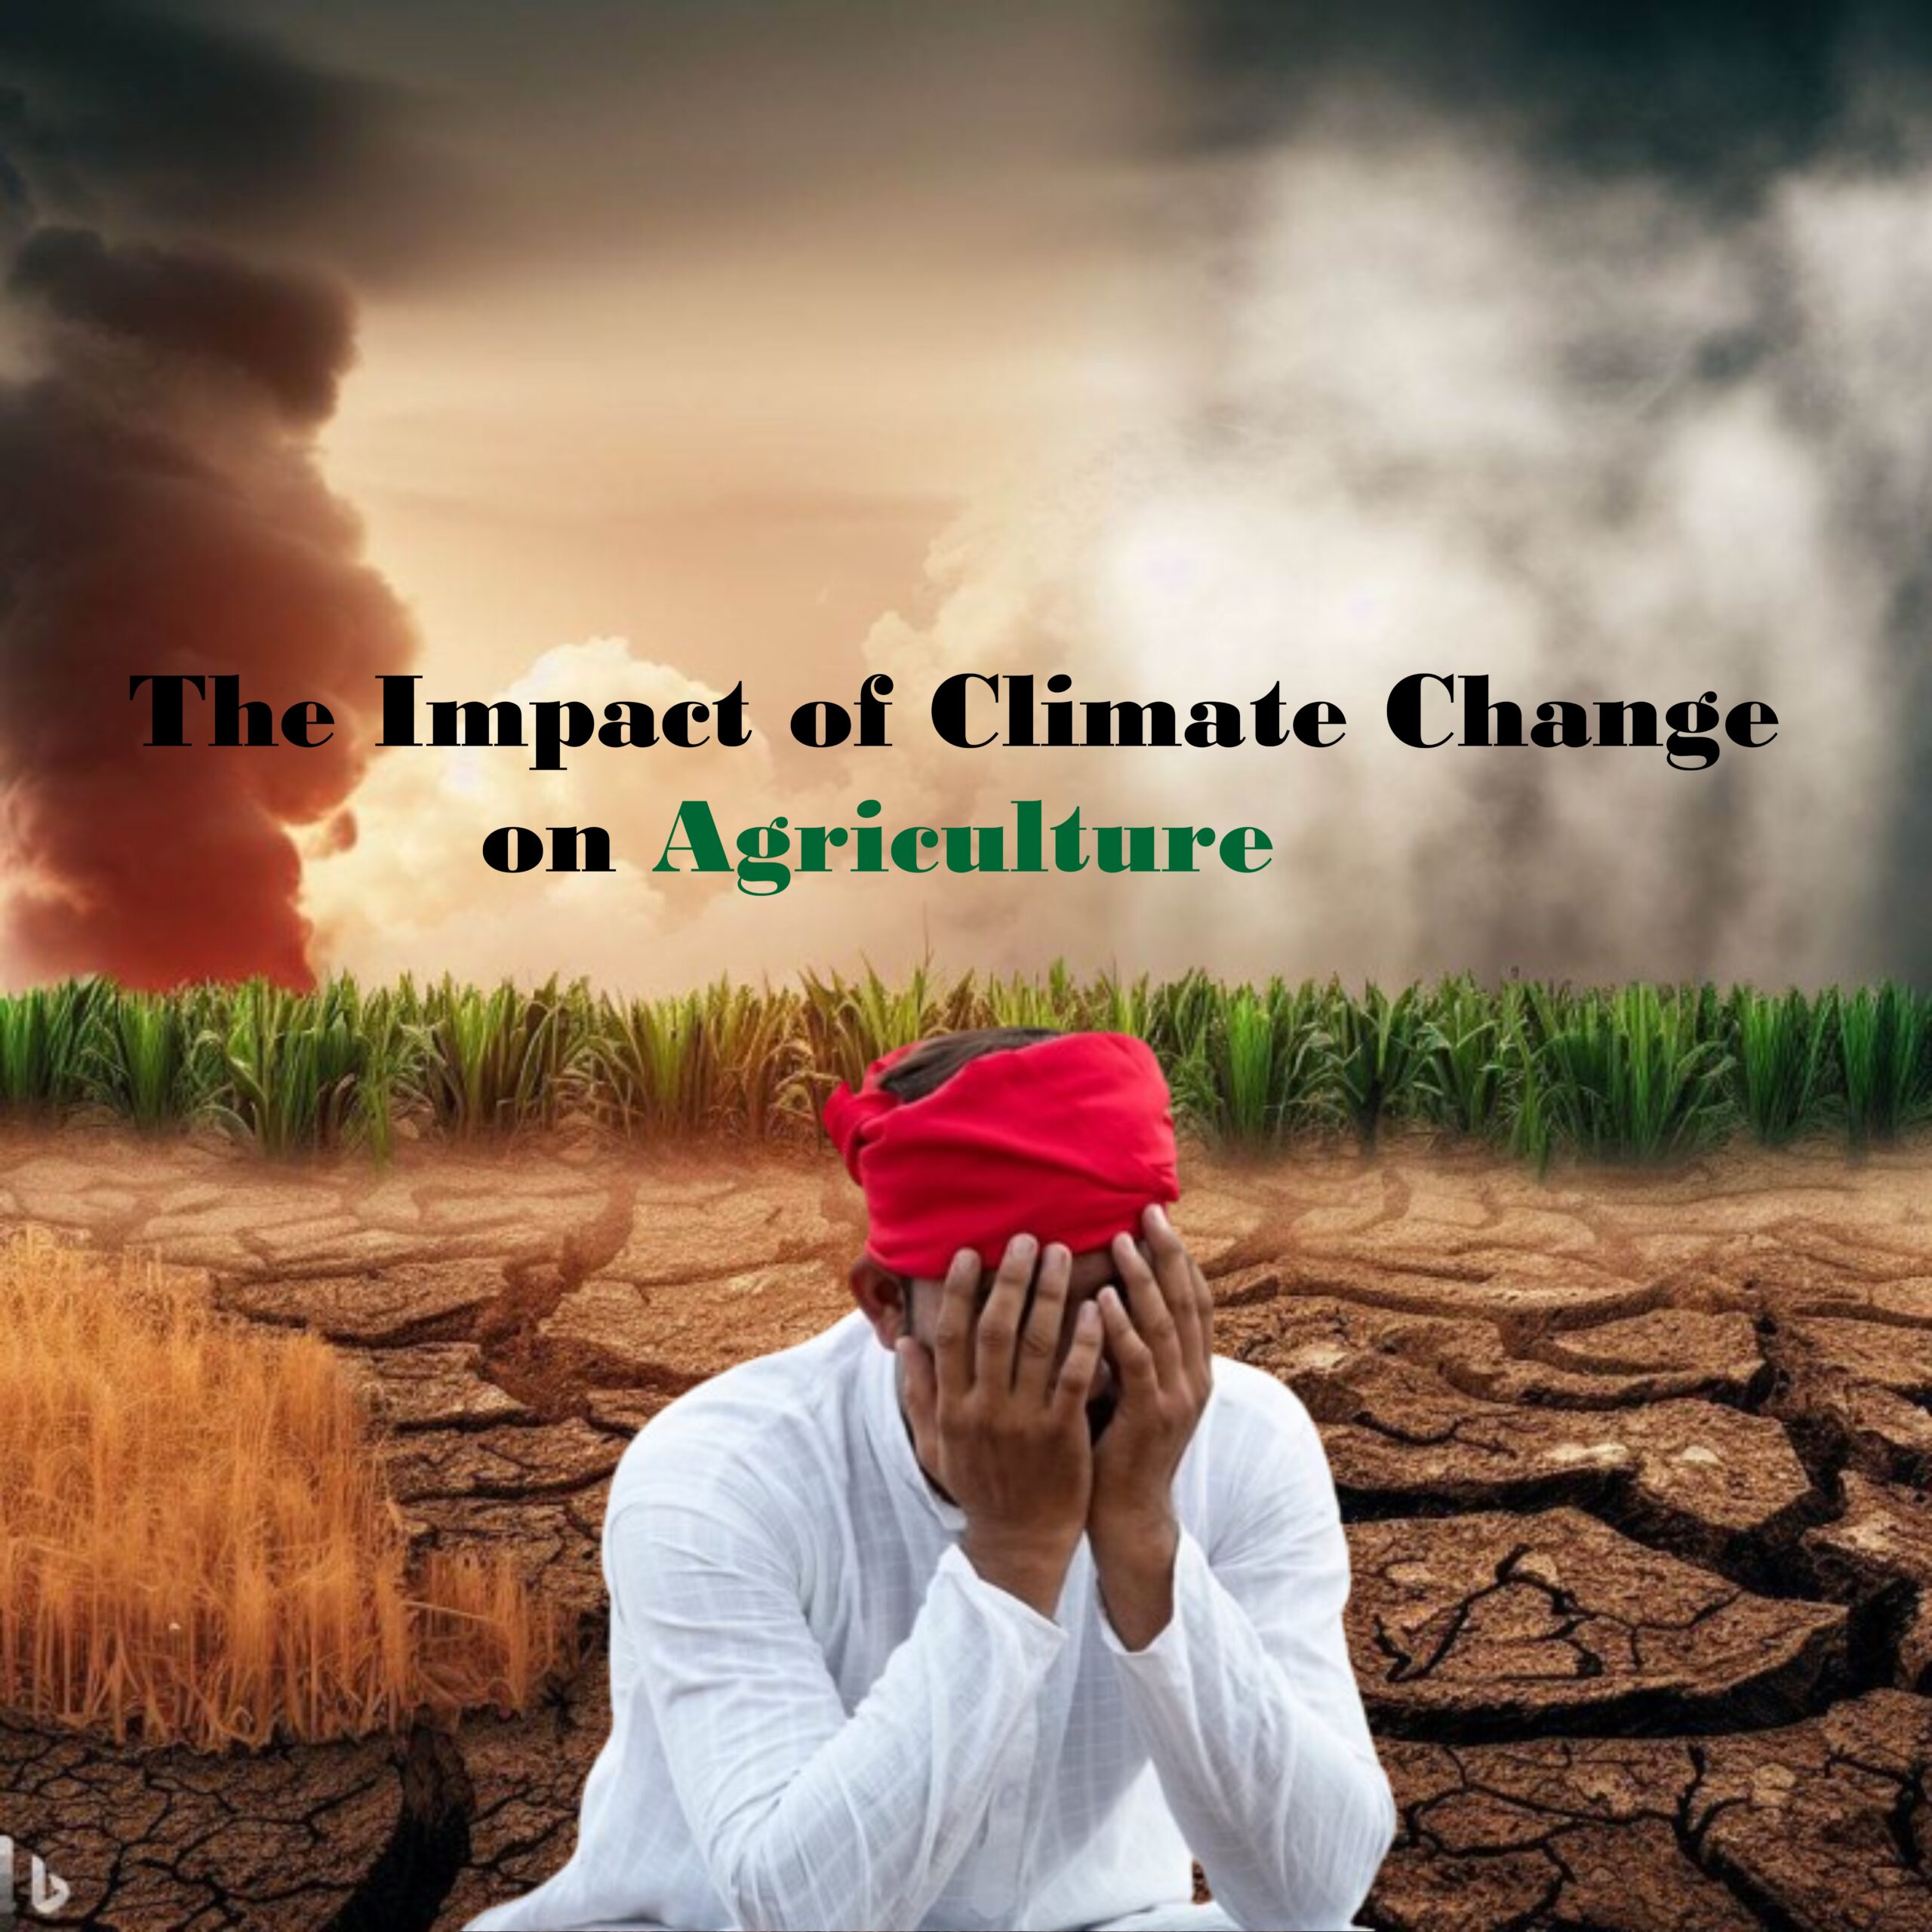 The Impact of Climate Change on Agriculture